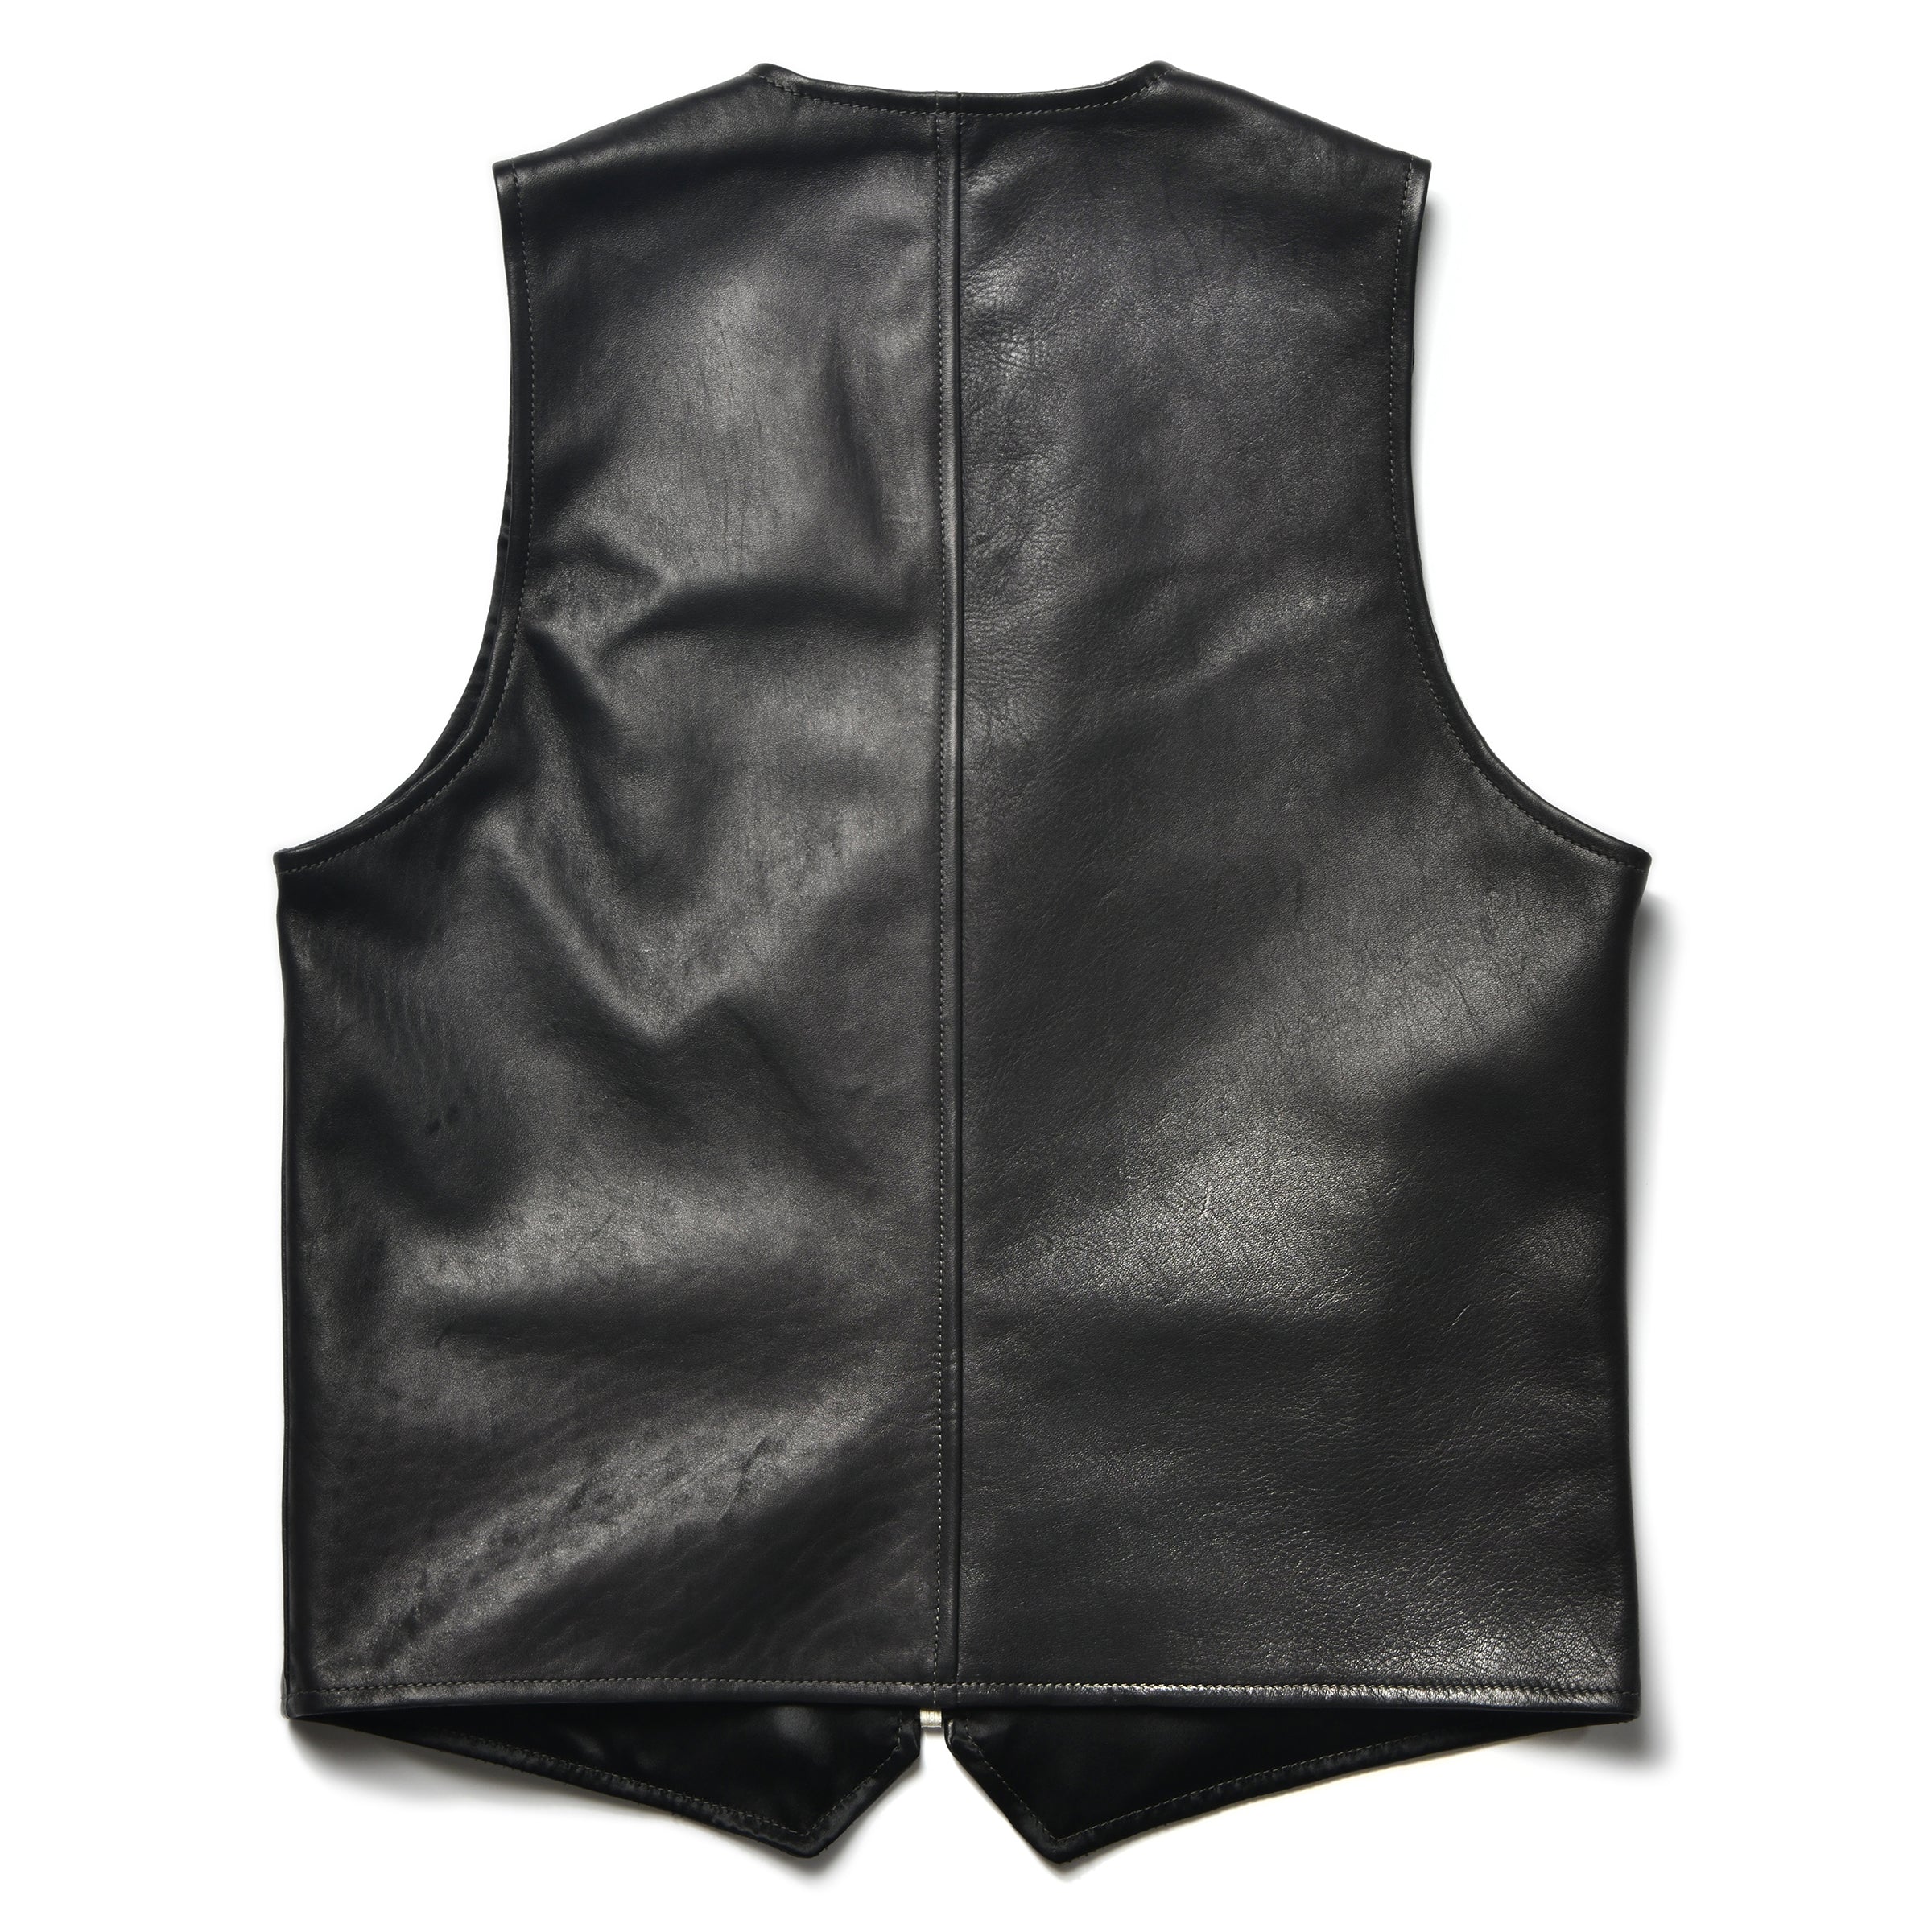 BUCO LEATHER VEST – The Real McCoy's